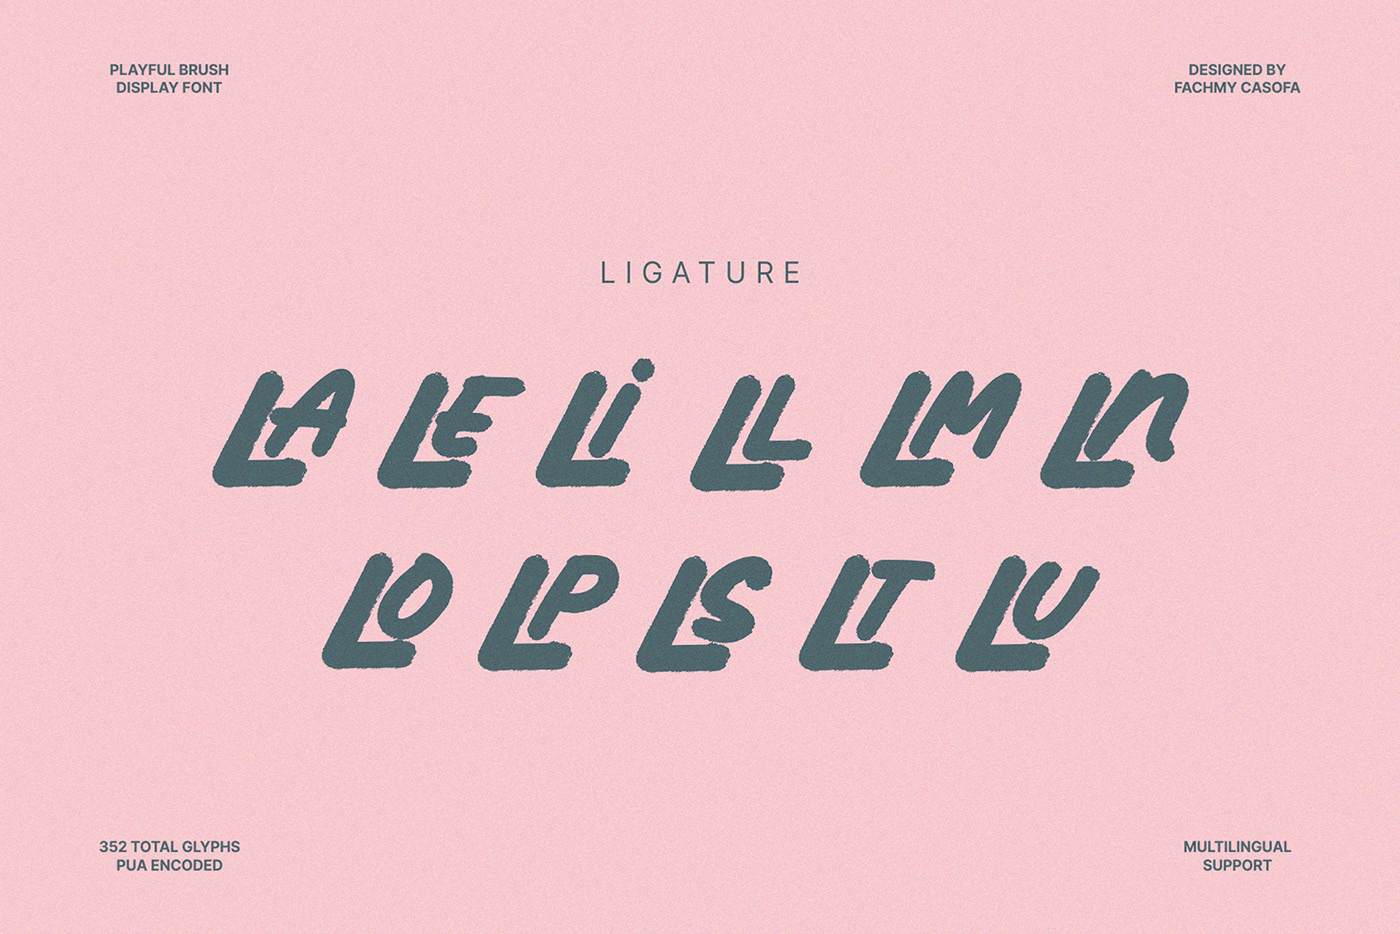 bold freebies Free font Playful brush Display modern cute Typeface lettering